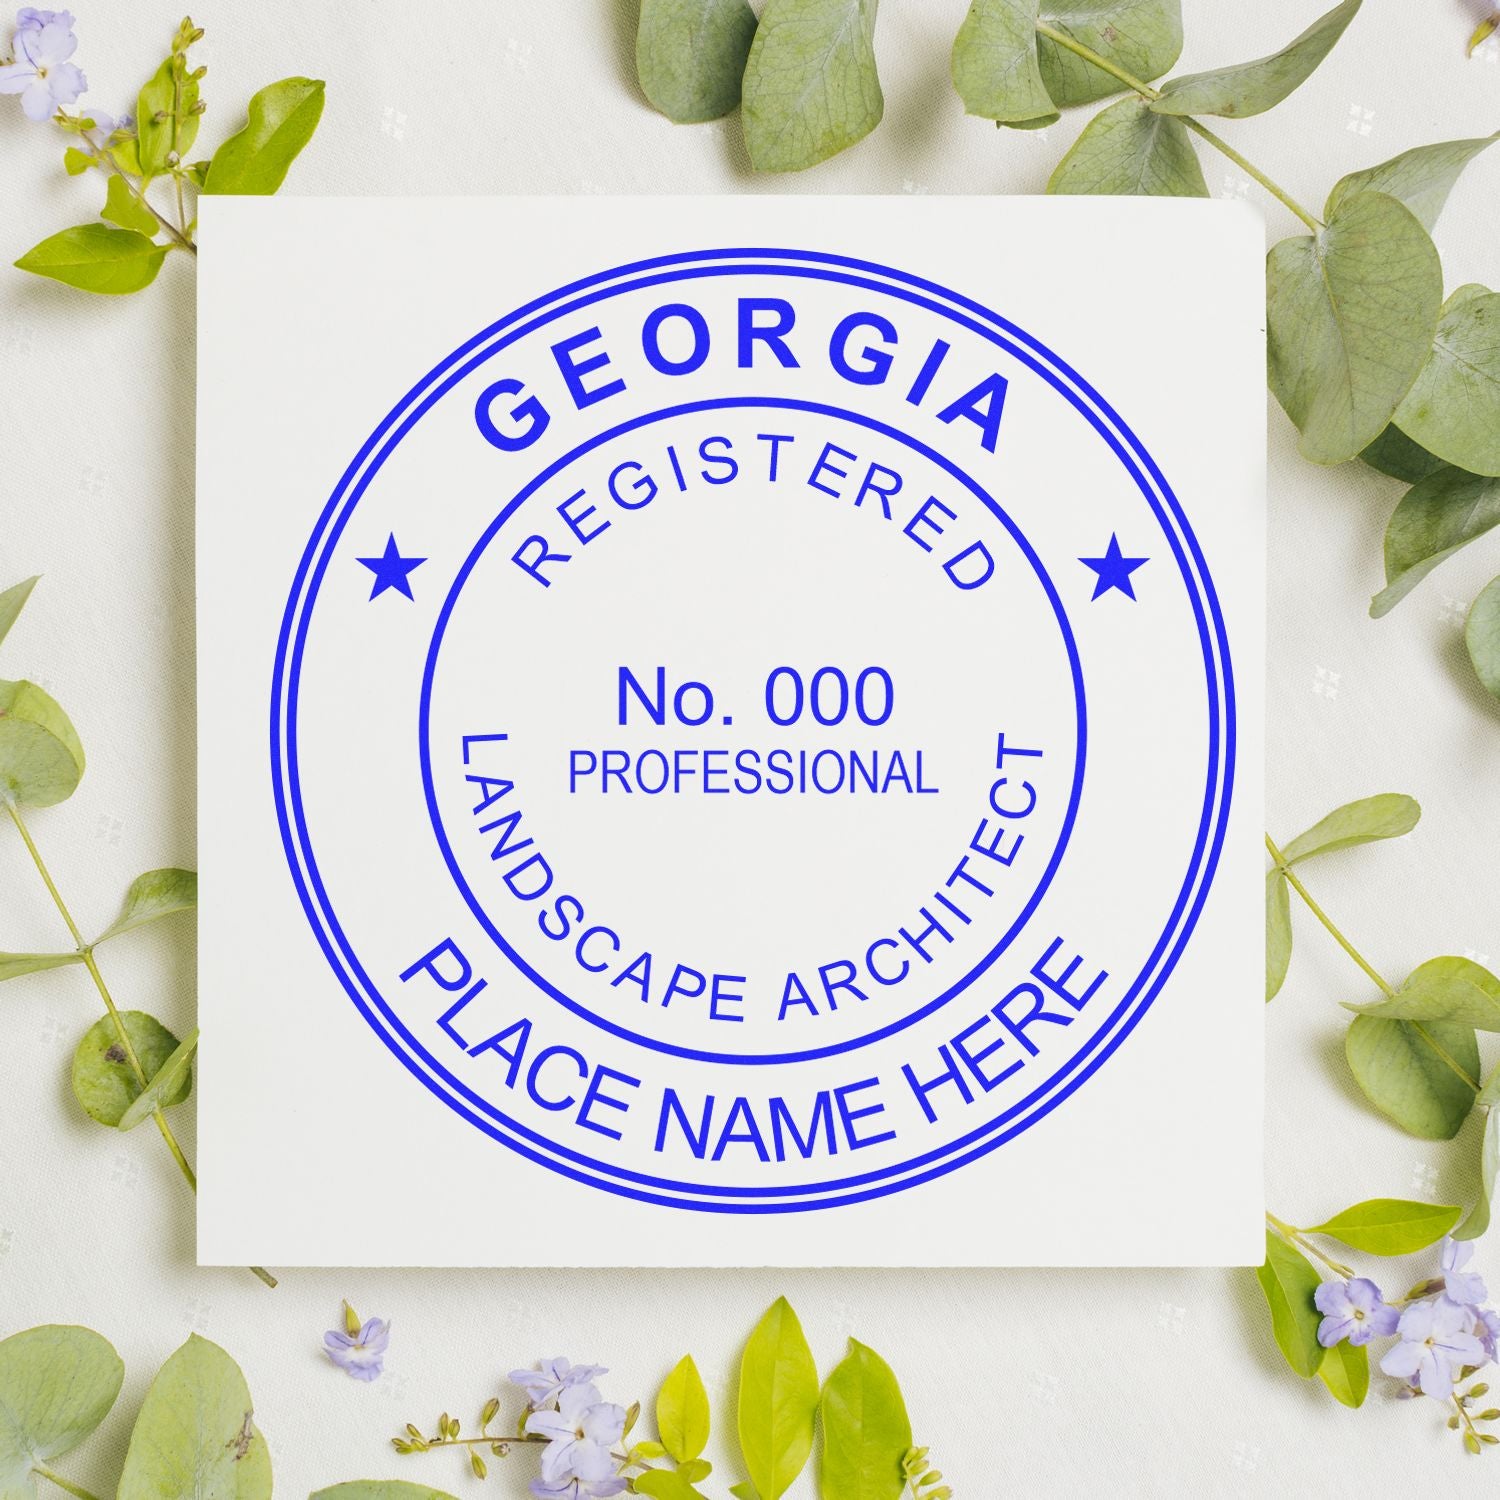 The main image for the Premium MaxLight Pre-Inked Georgia Landscape Architectural Stamp depicting a sample of the imprint and electronic files